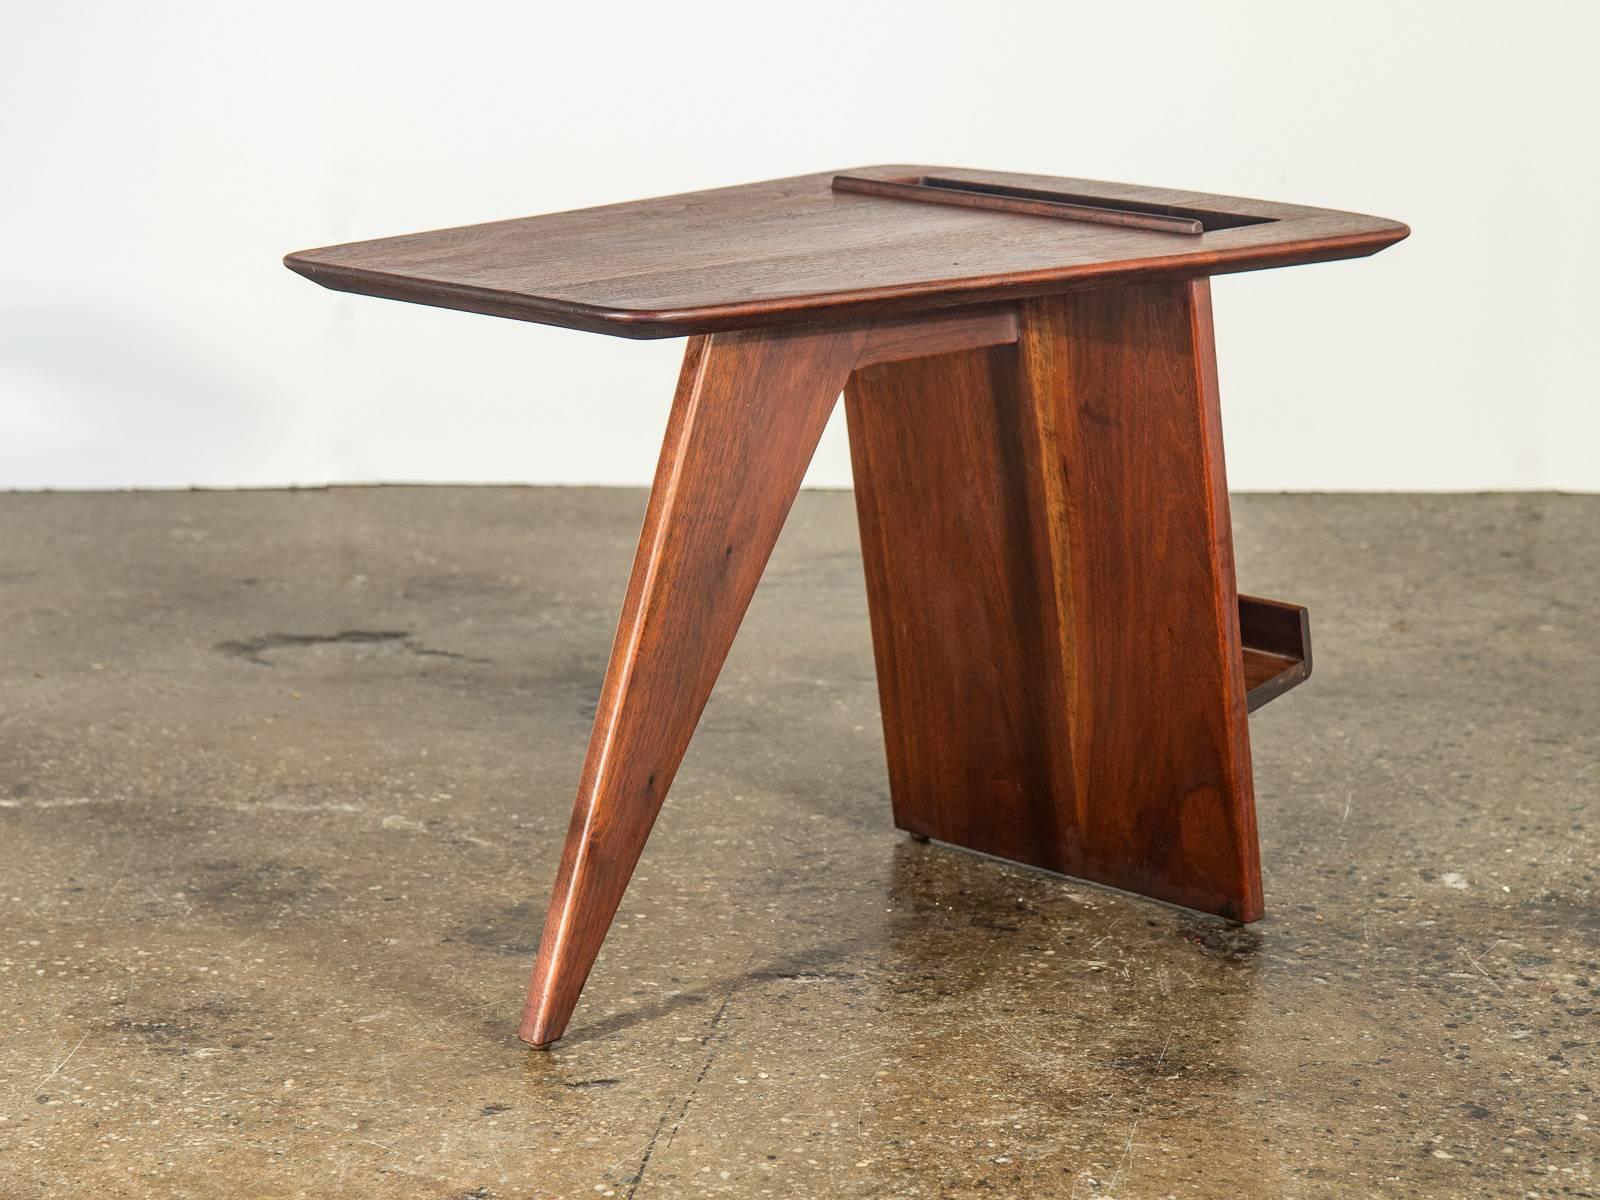 A walnut version of the T539 wedge-shaped side table designed by Jens Risom in 1949. A lovely companion to our other Risom magazine table in birch, listed separately. Restored. Label extant. In excellent vintage condition.

24.75